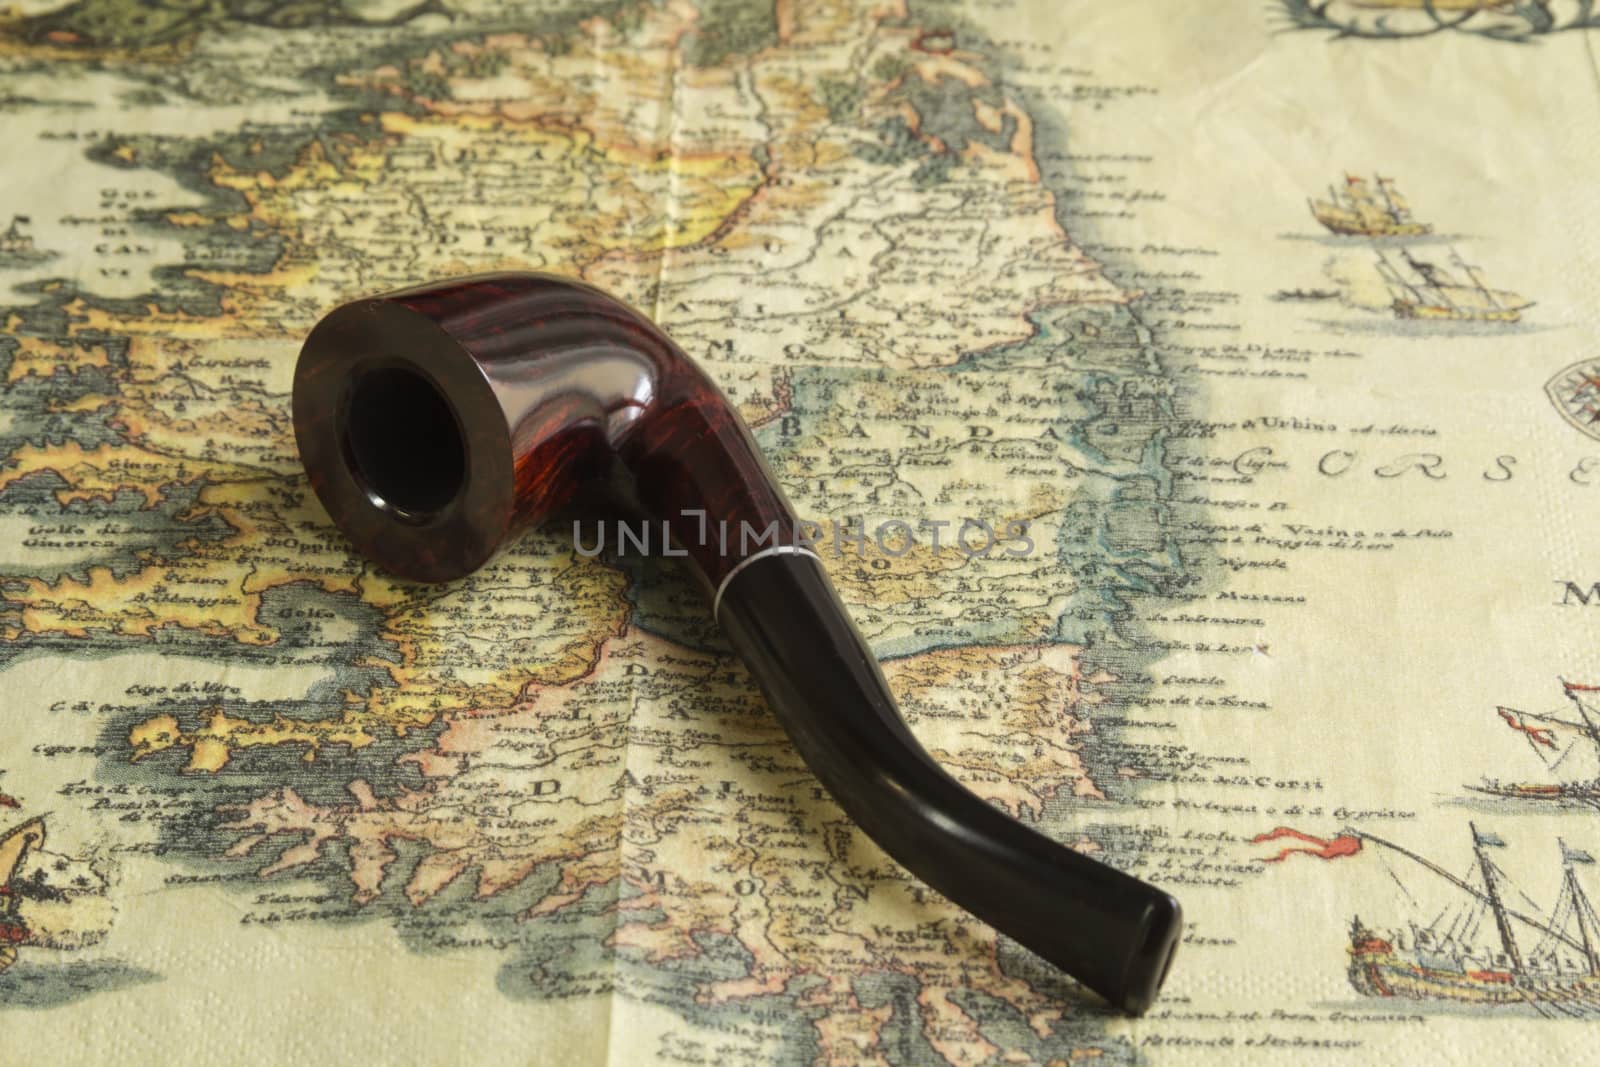 tobacco pipe lying on the ancient map of treasures